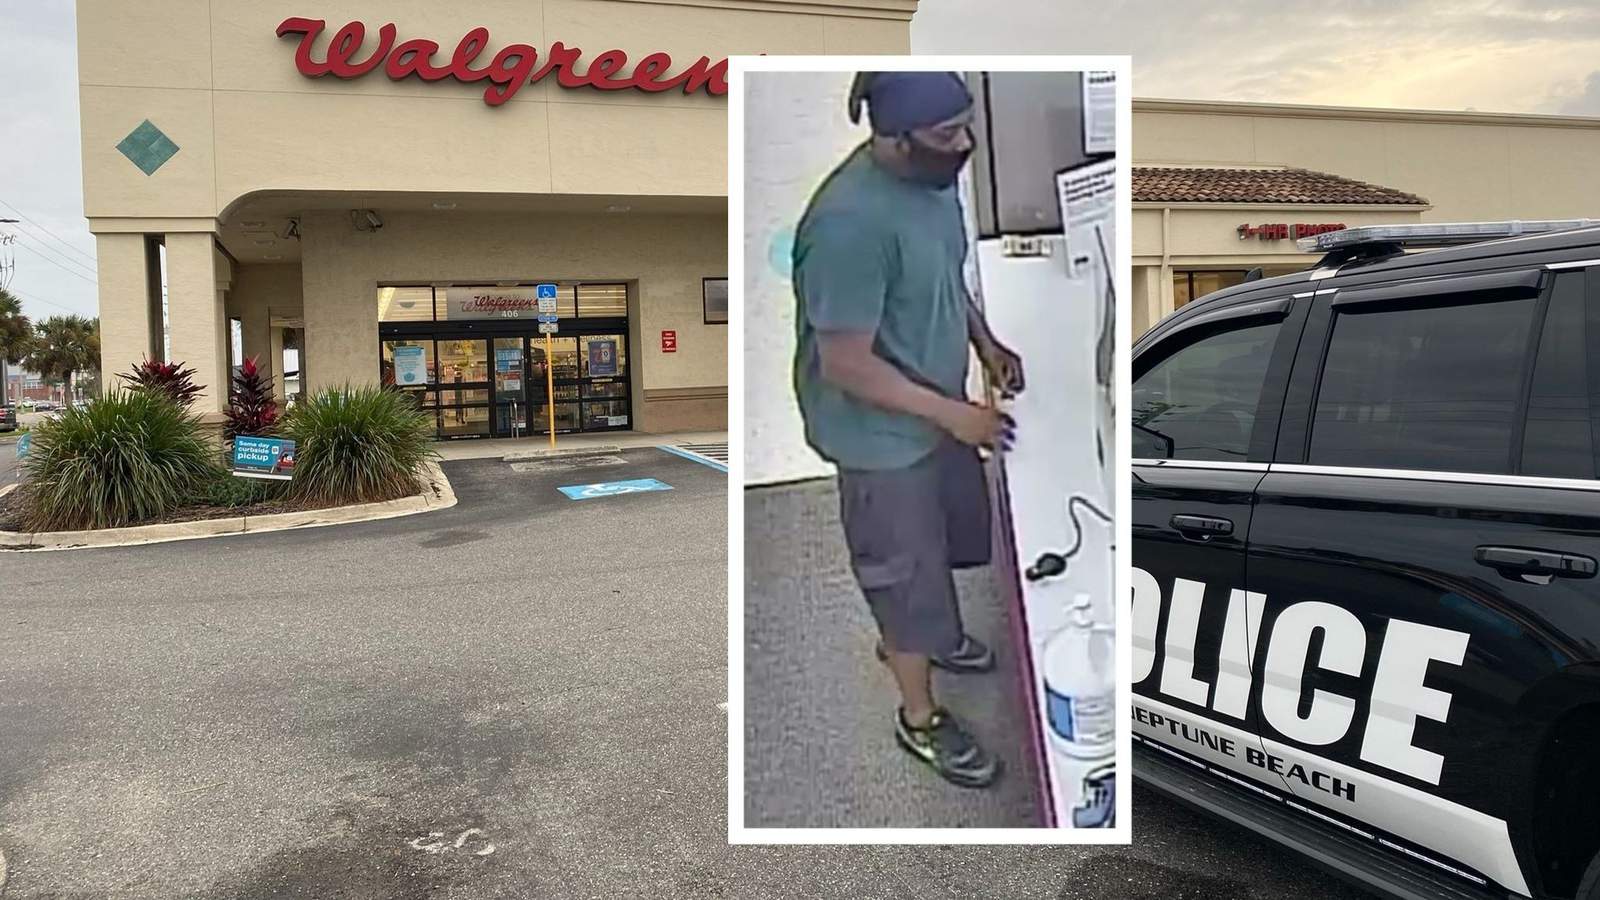 Neptune Beach police: 1 sought in Walgreens armed robbery